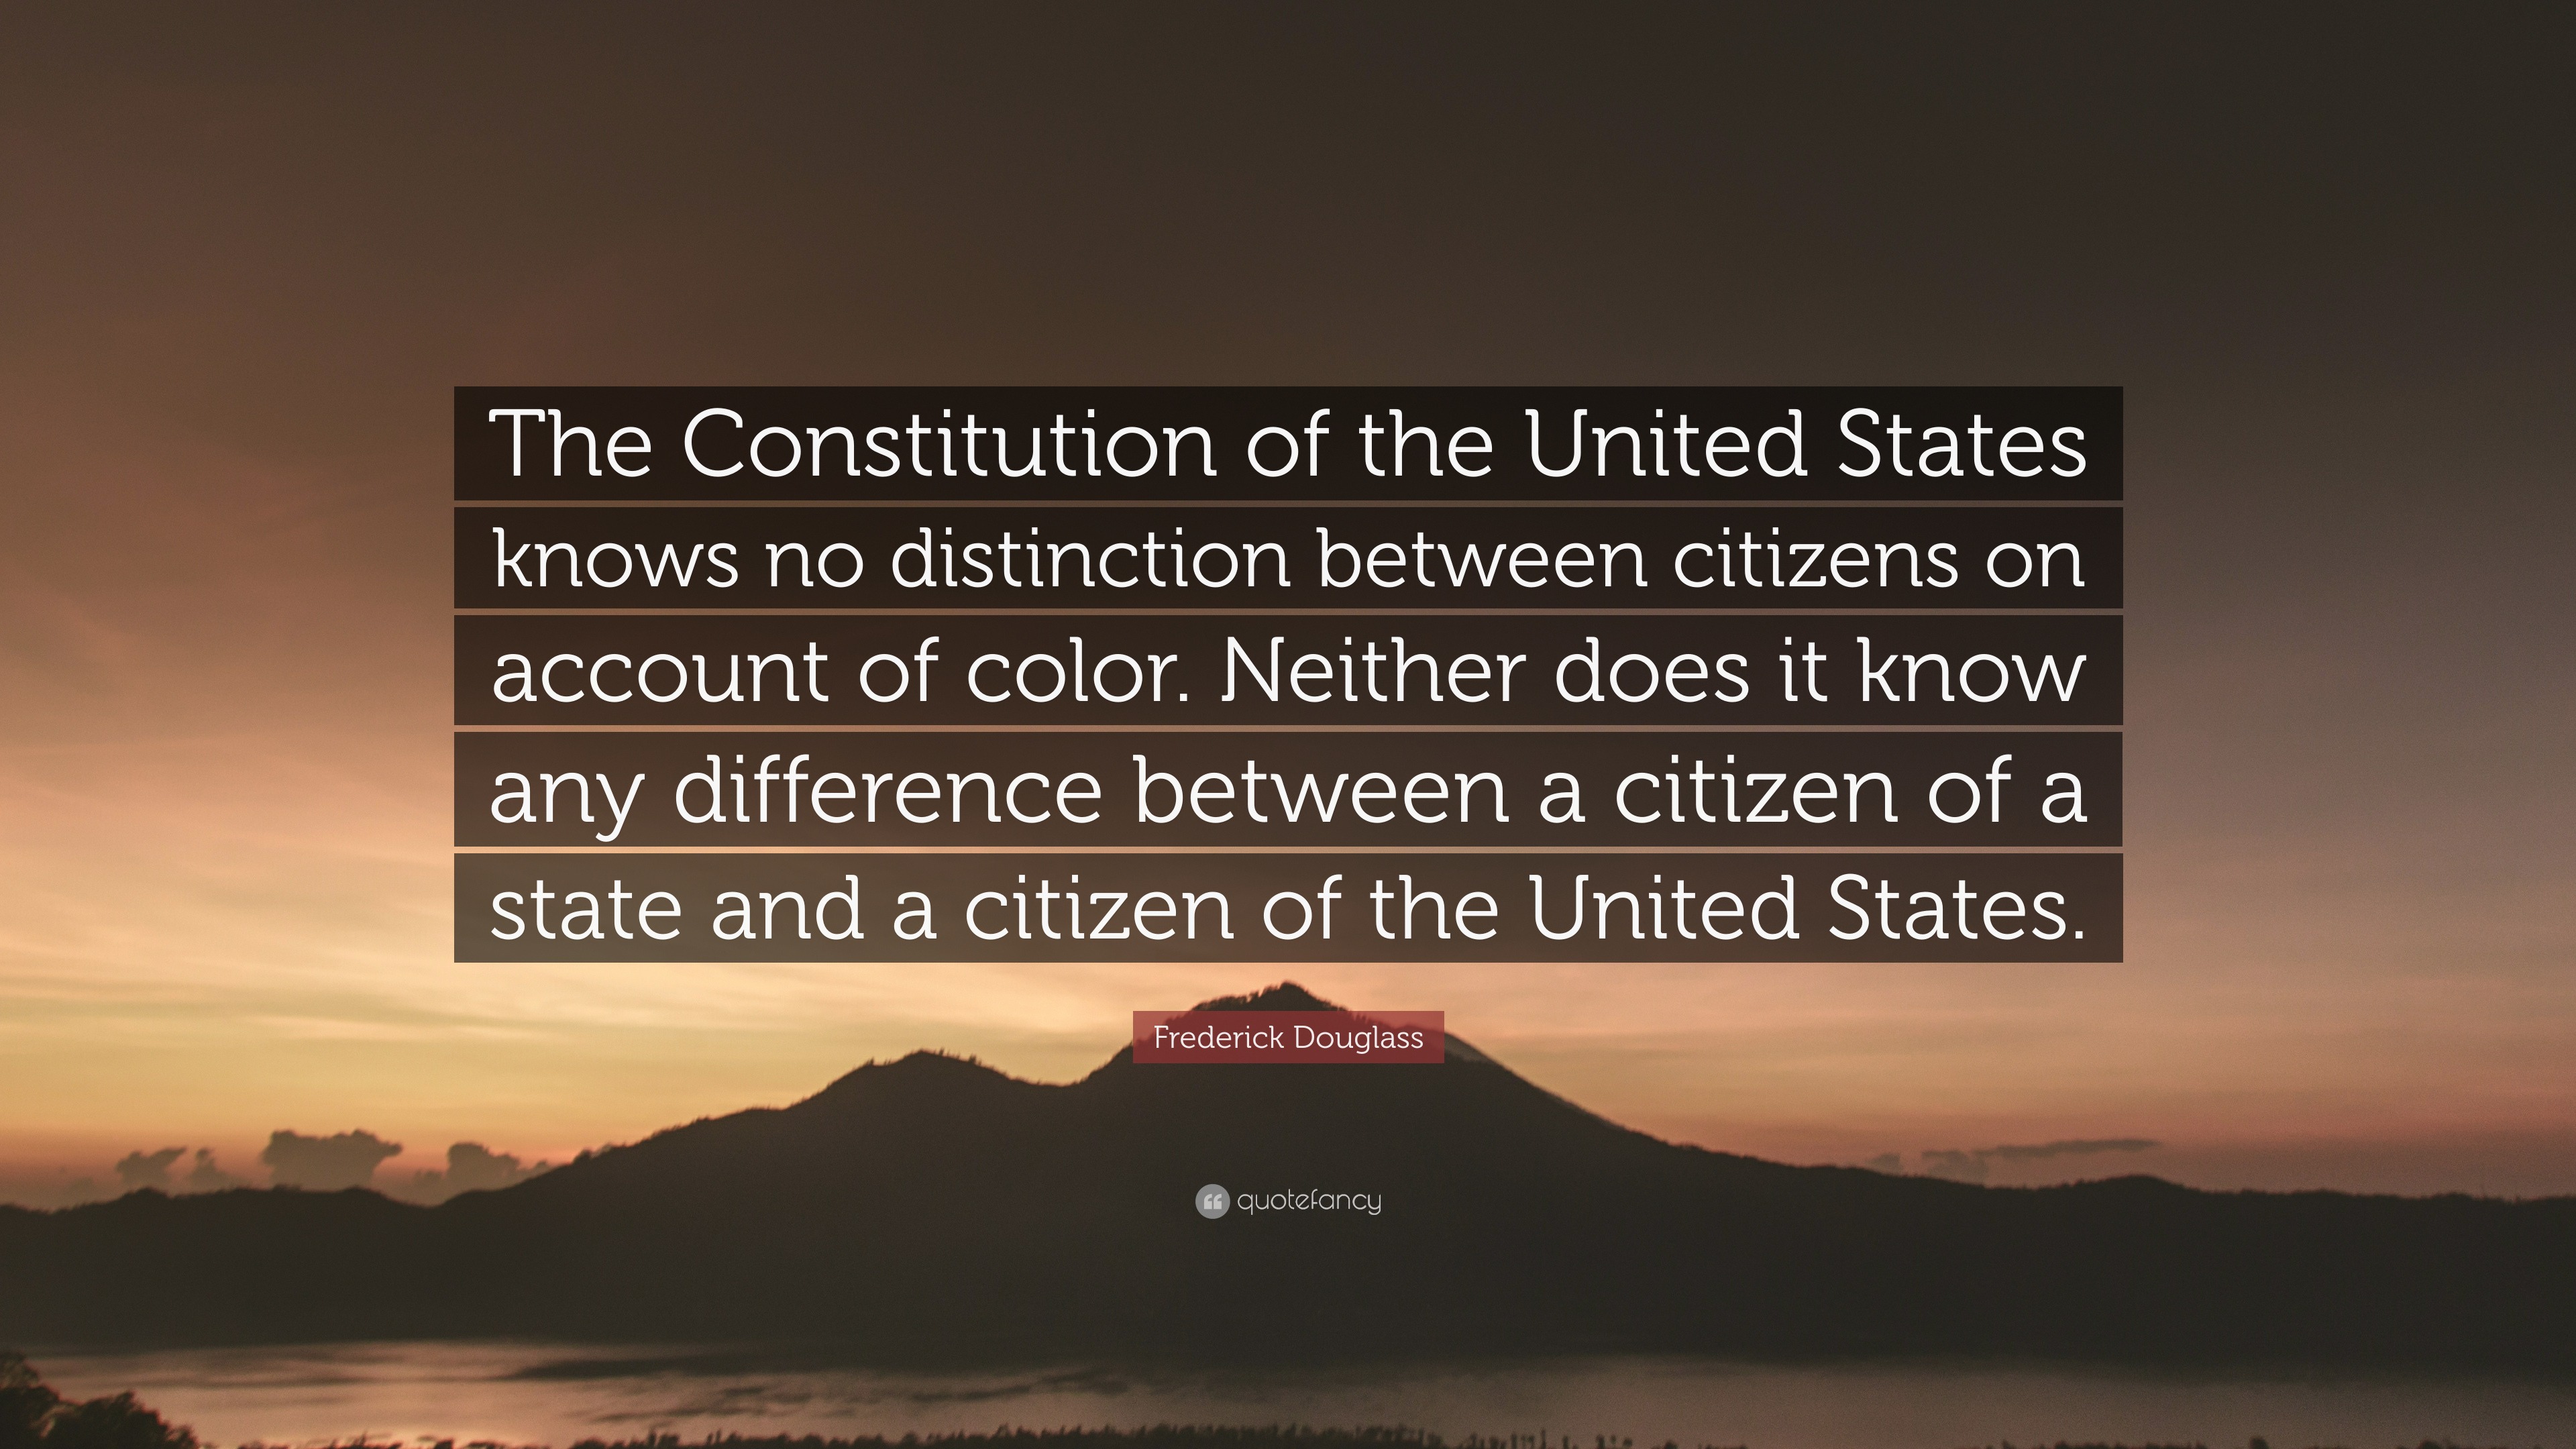 There Is No Such Thing As “The” United States Constitution